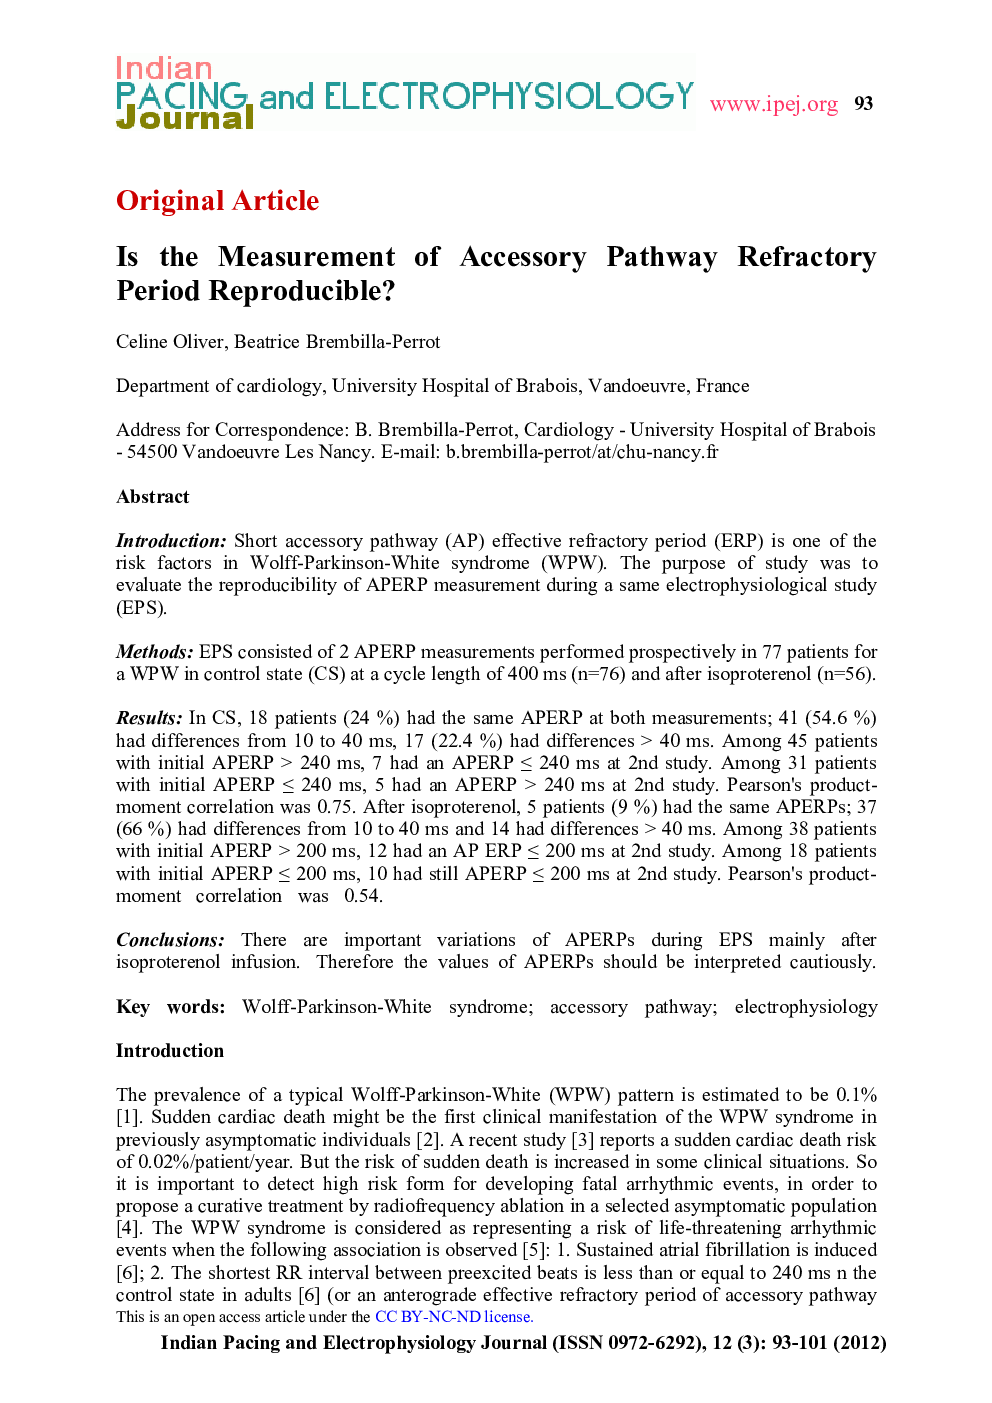 Is the Measurement of Accessory Pathway Refractory Period Reproducible?